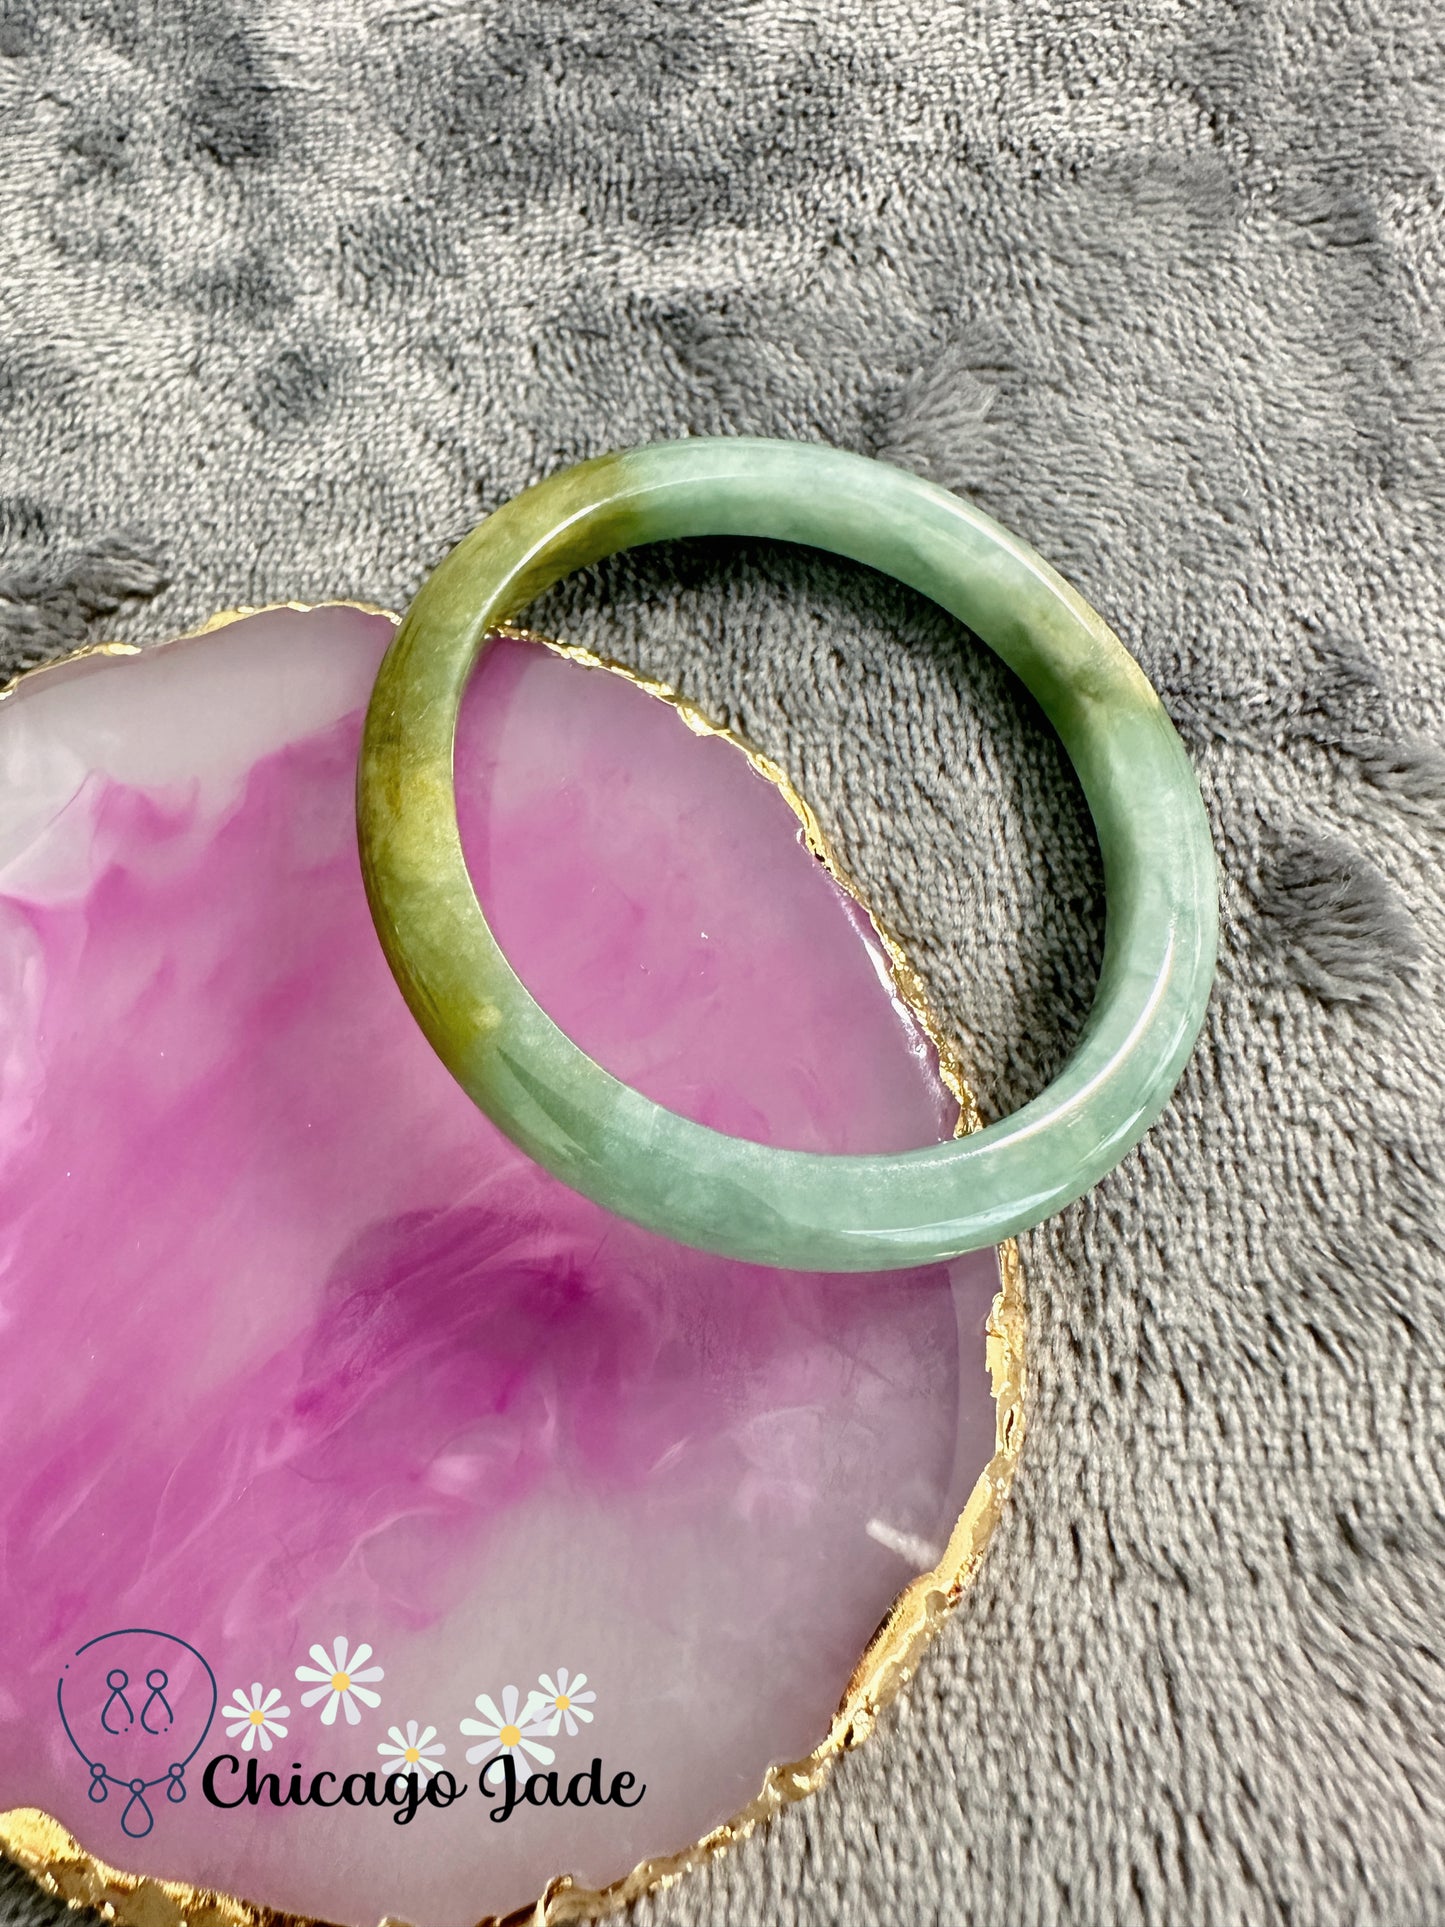 Oval shaped green yellow jadeite jade bangle good value natural untreated size XS